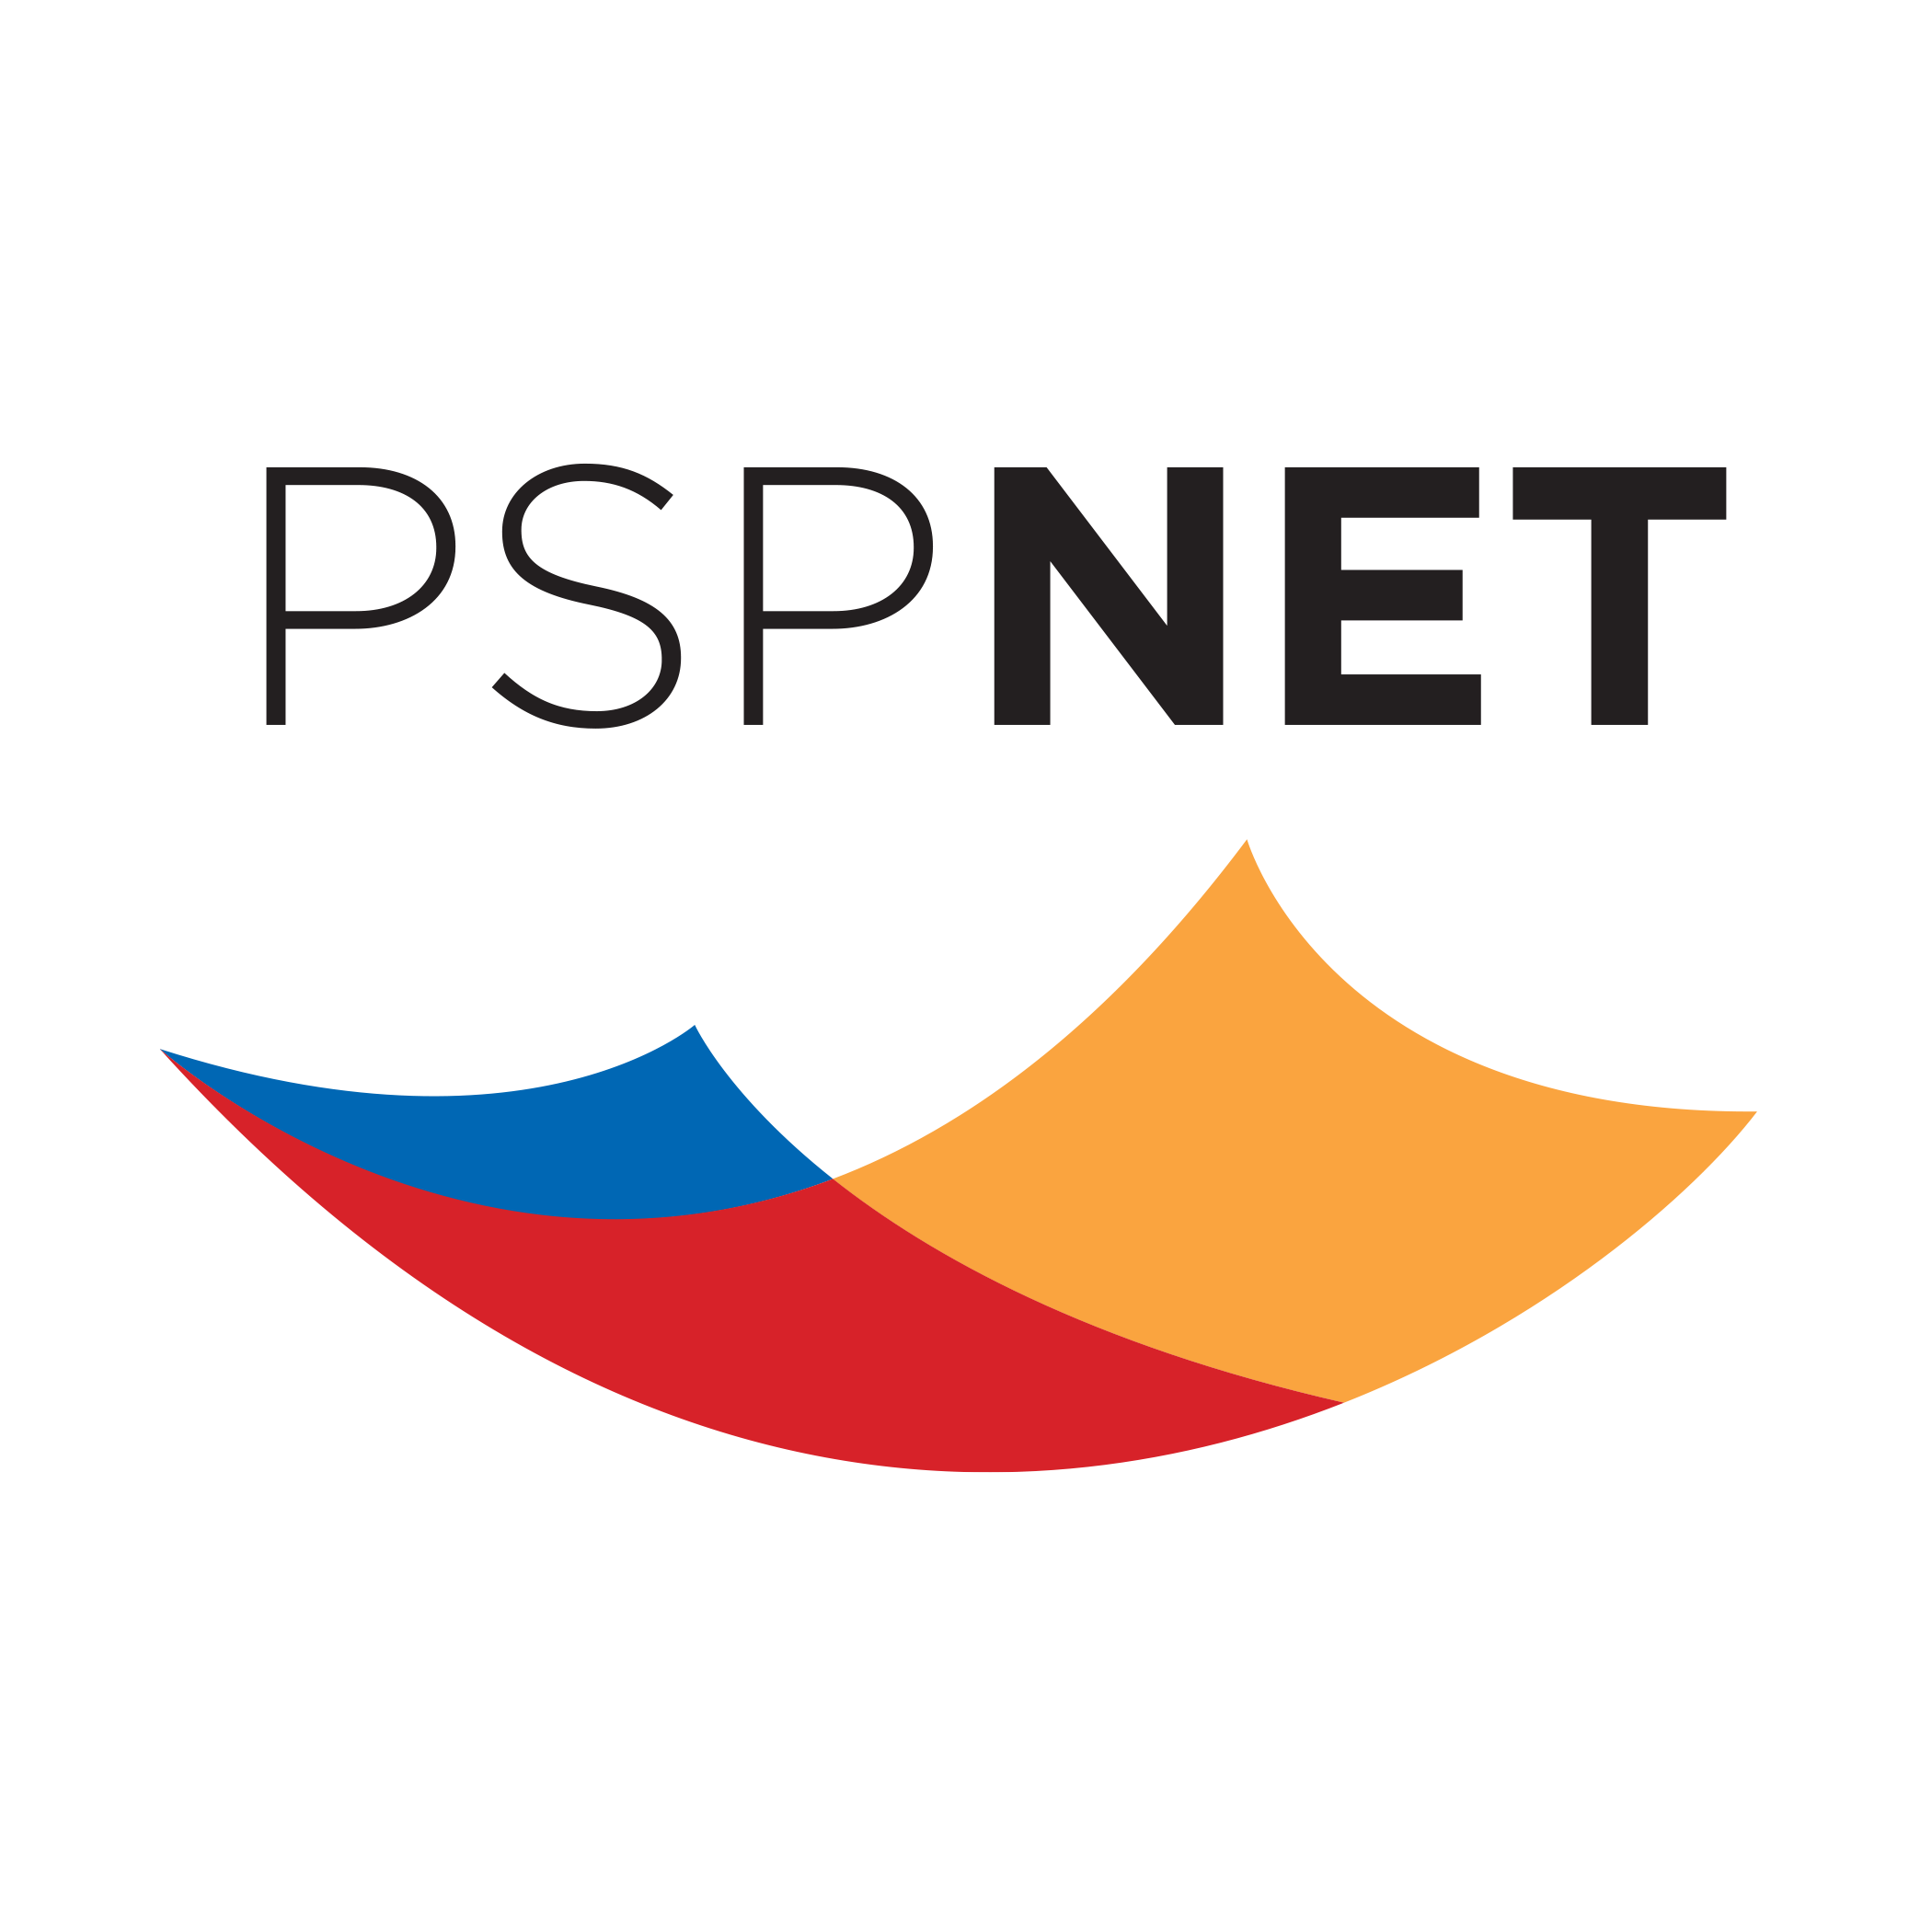 PSPNET offers online programming for public safety personnel (PSP) manage and maintain their mental health and well-being. Once only offered to PSP in Saskatchewan and Quebec, support from Medavie, through the Medavie Health Foundation, has allowed the program to expand to the Maritimes. 